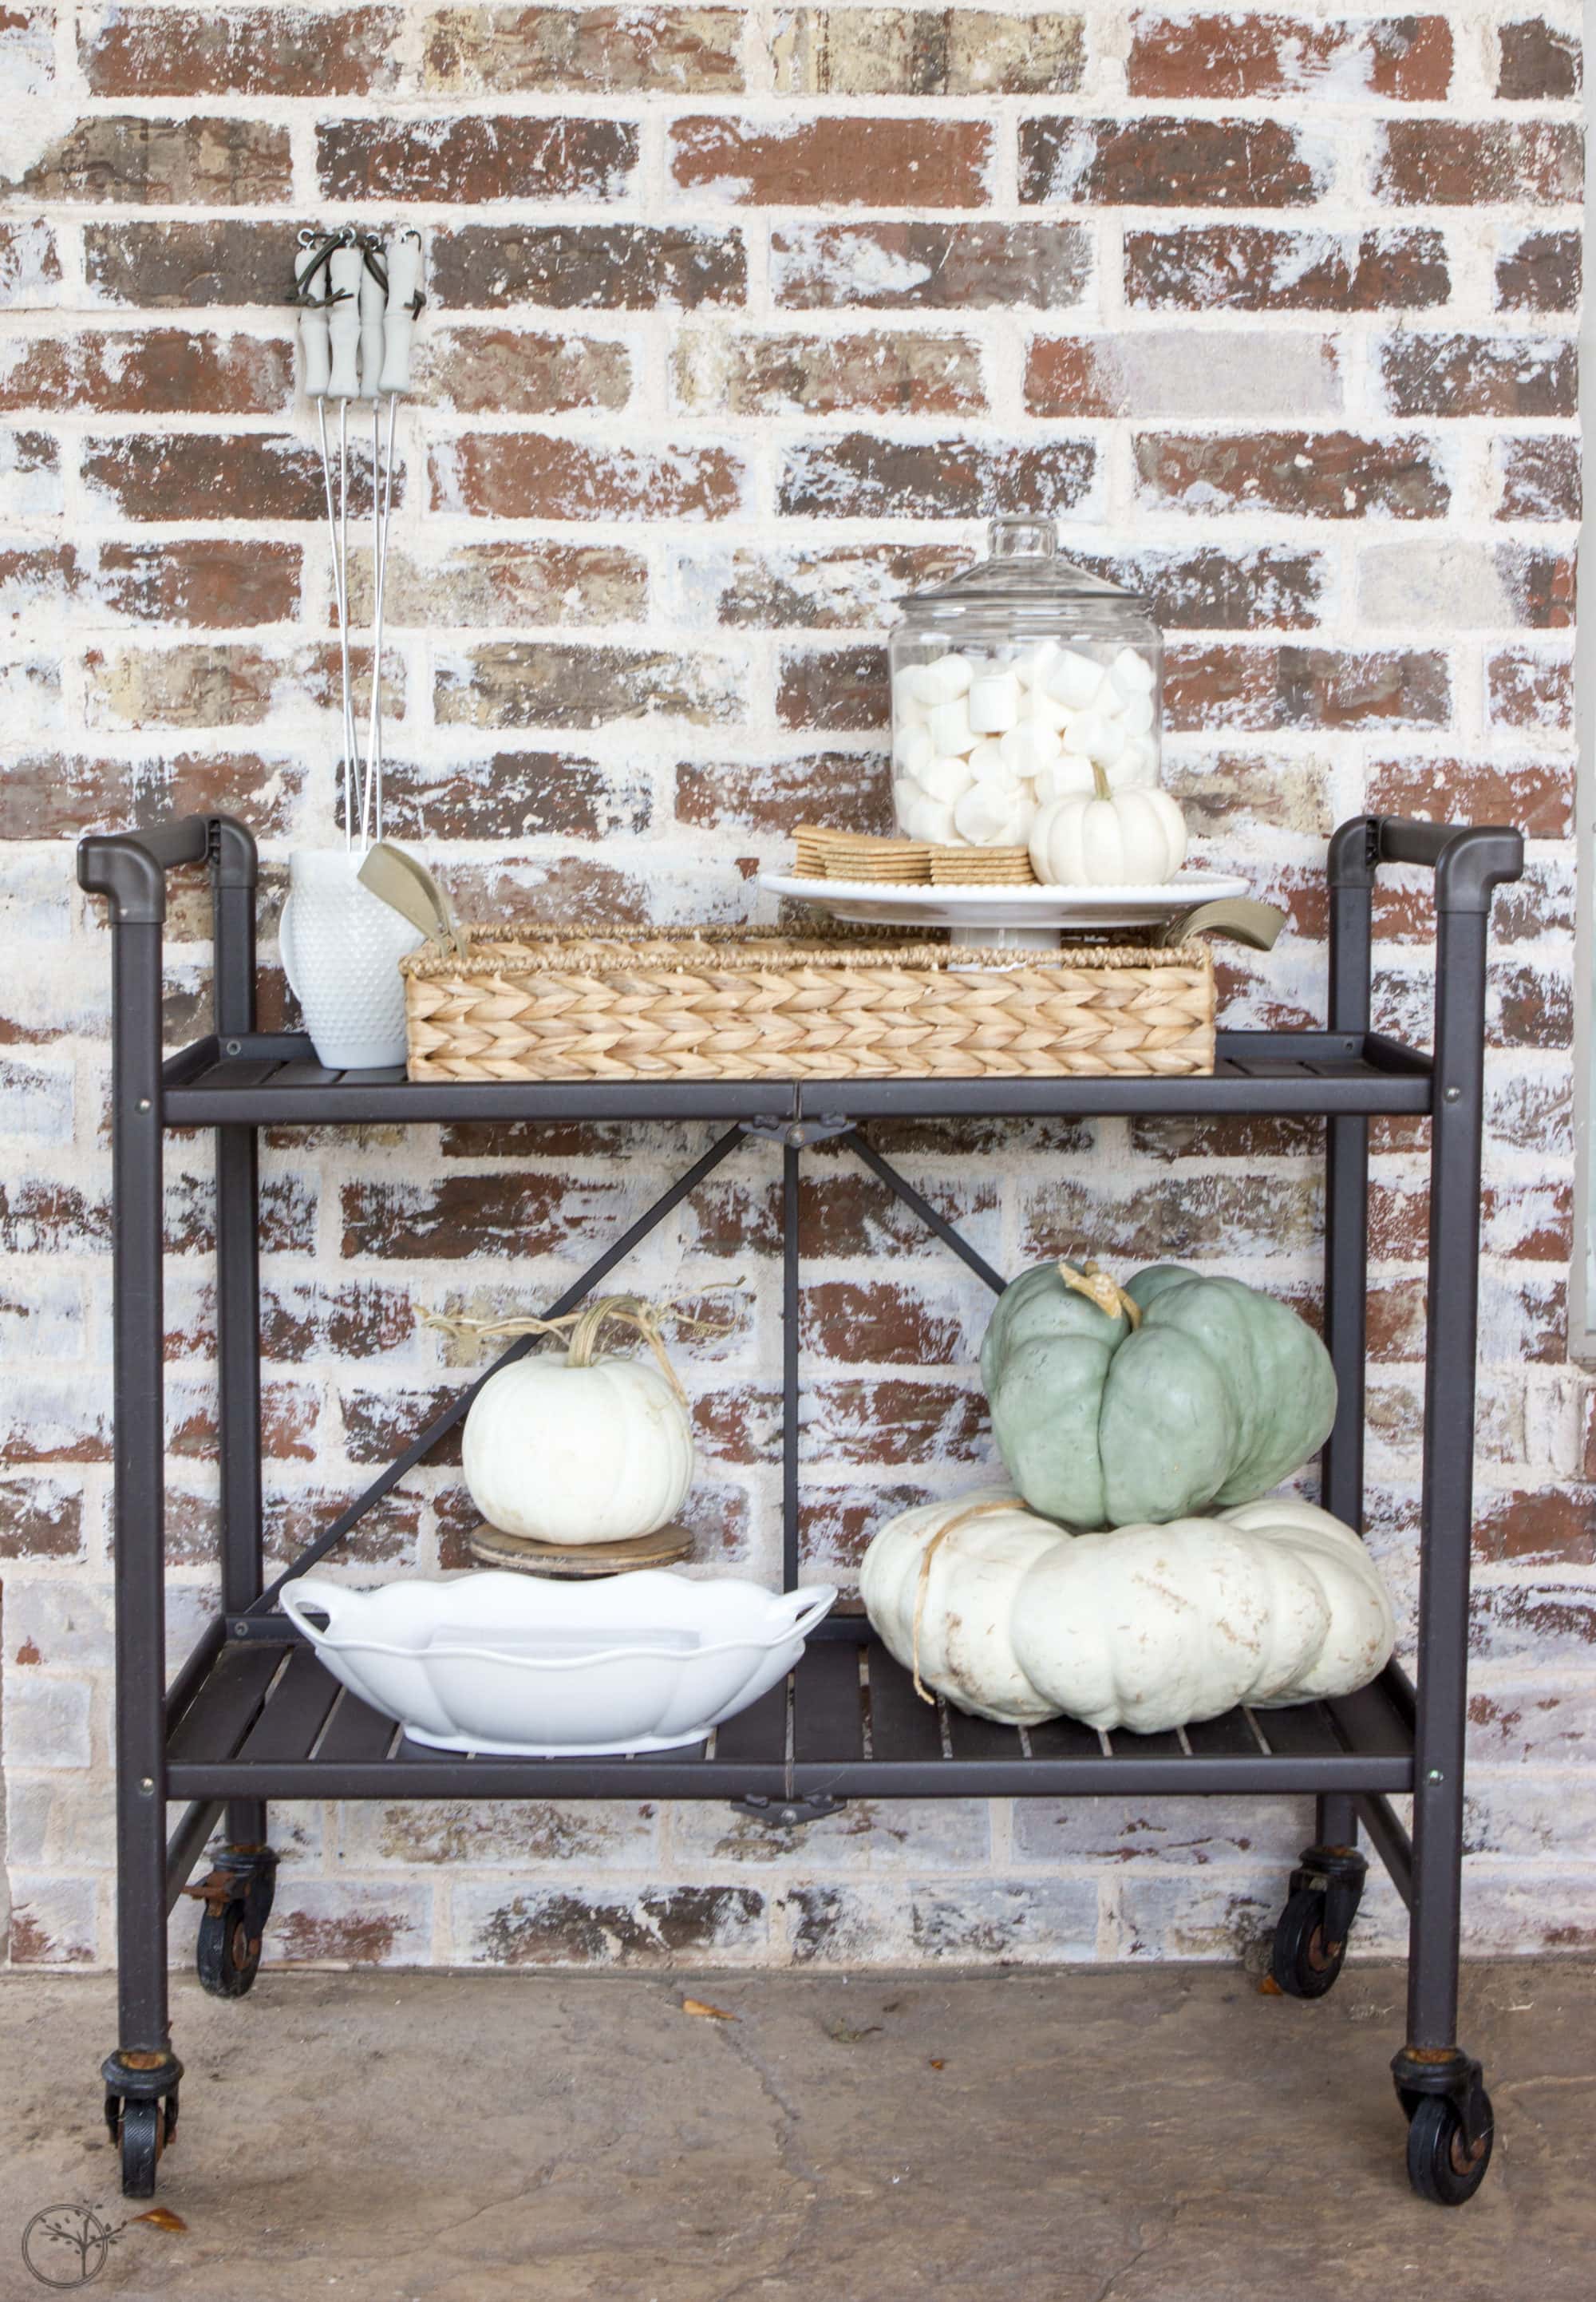 Outdoor S’mores Bar Cart for Fall Entertaining With Friends